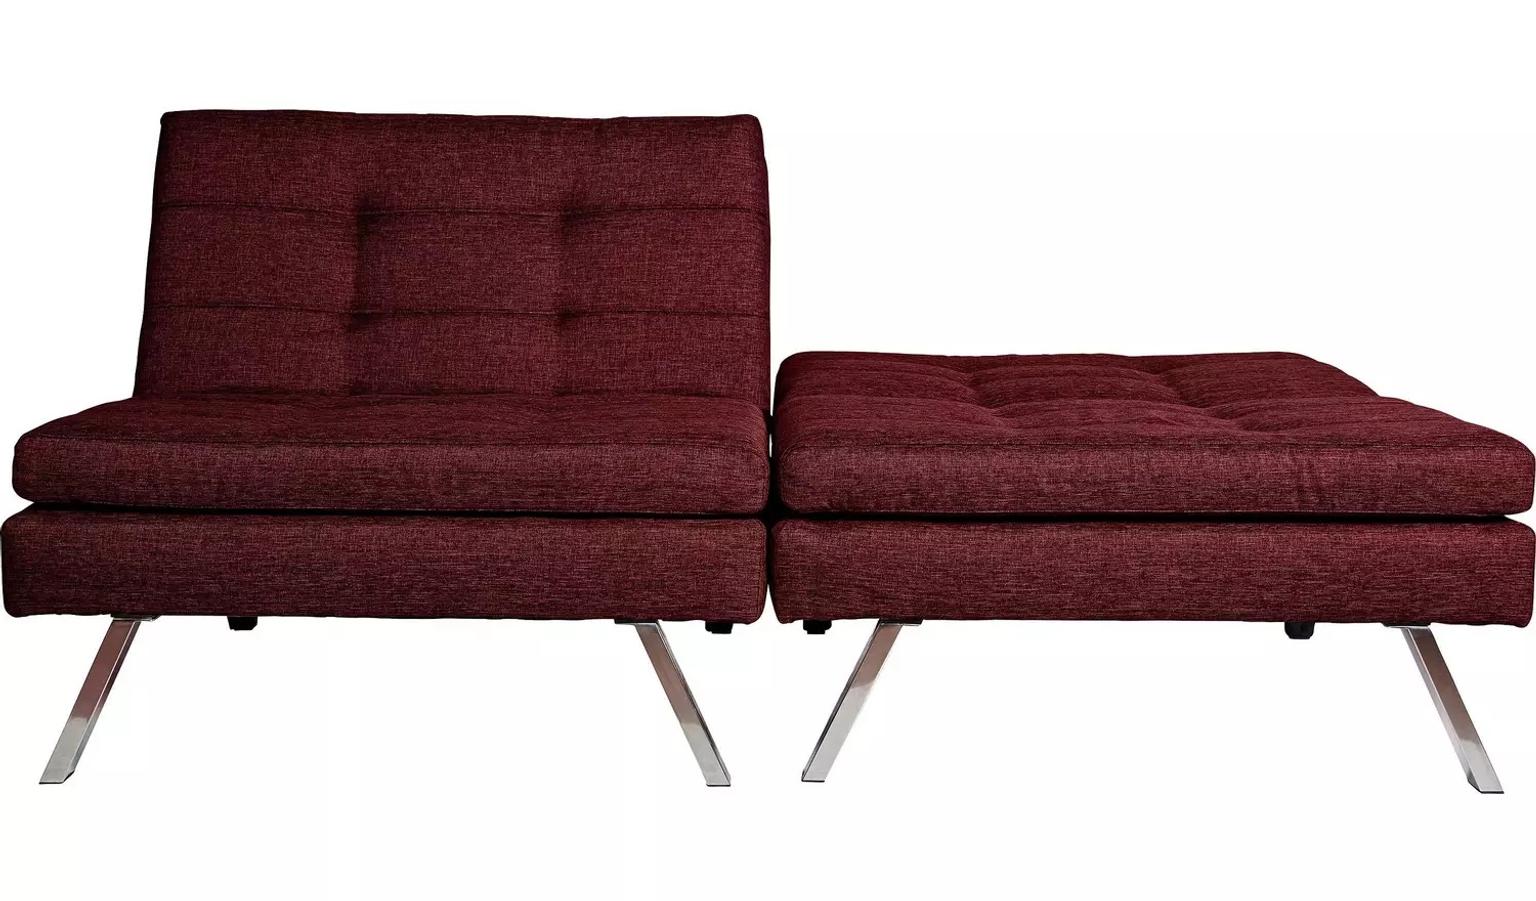 Duo 2 Seater Clic Clac Sofa Bed 355, Duo 2 Seater Clic Clac Sofa Bed Red